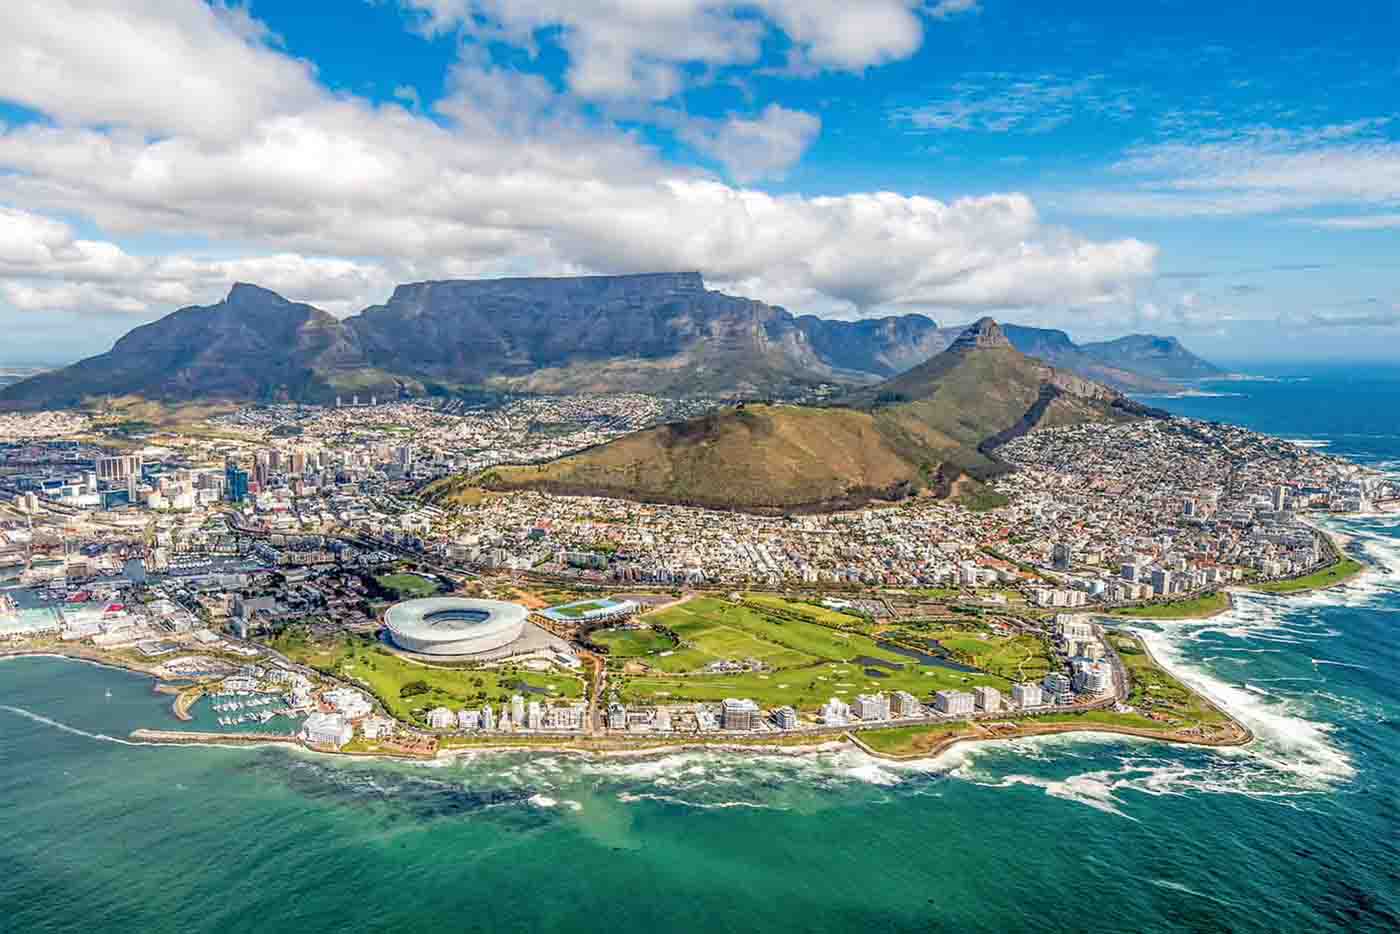 Image of Cape Town in South Africa